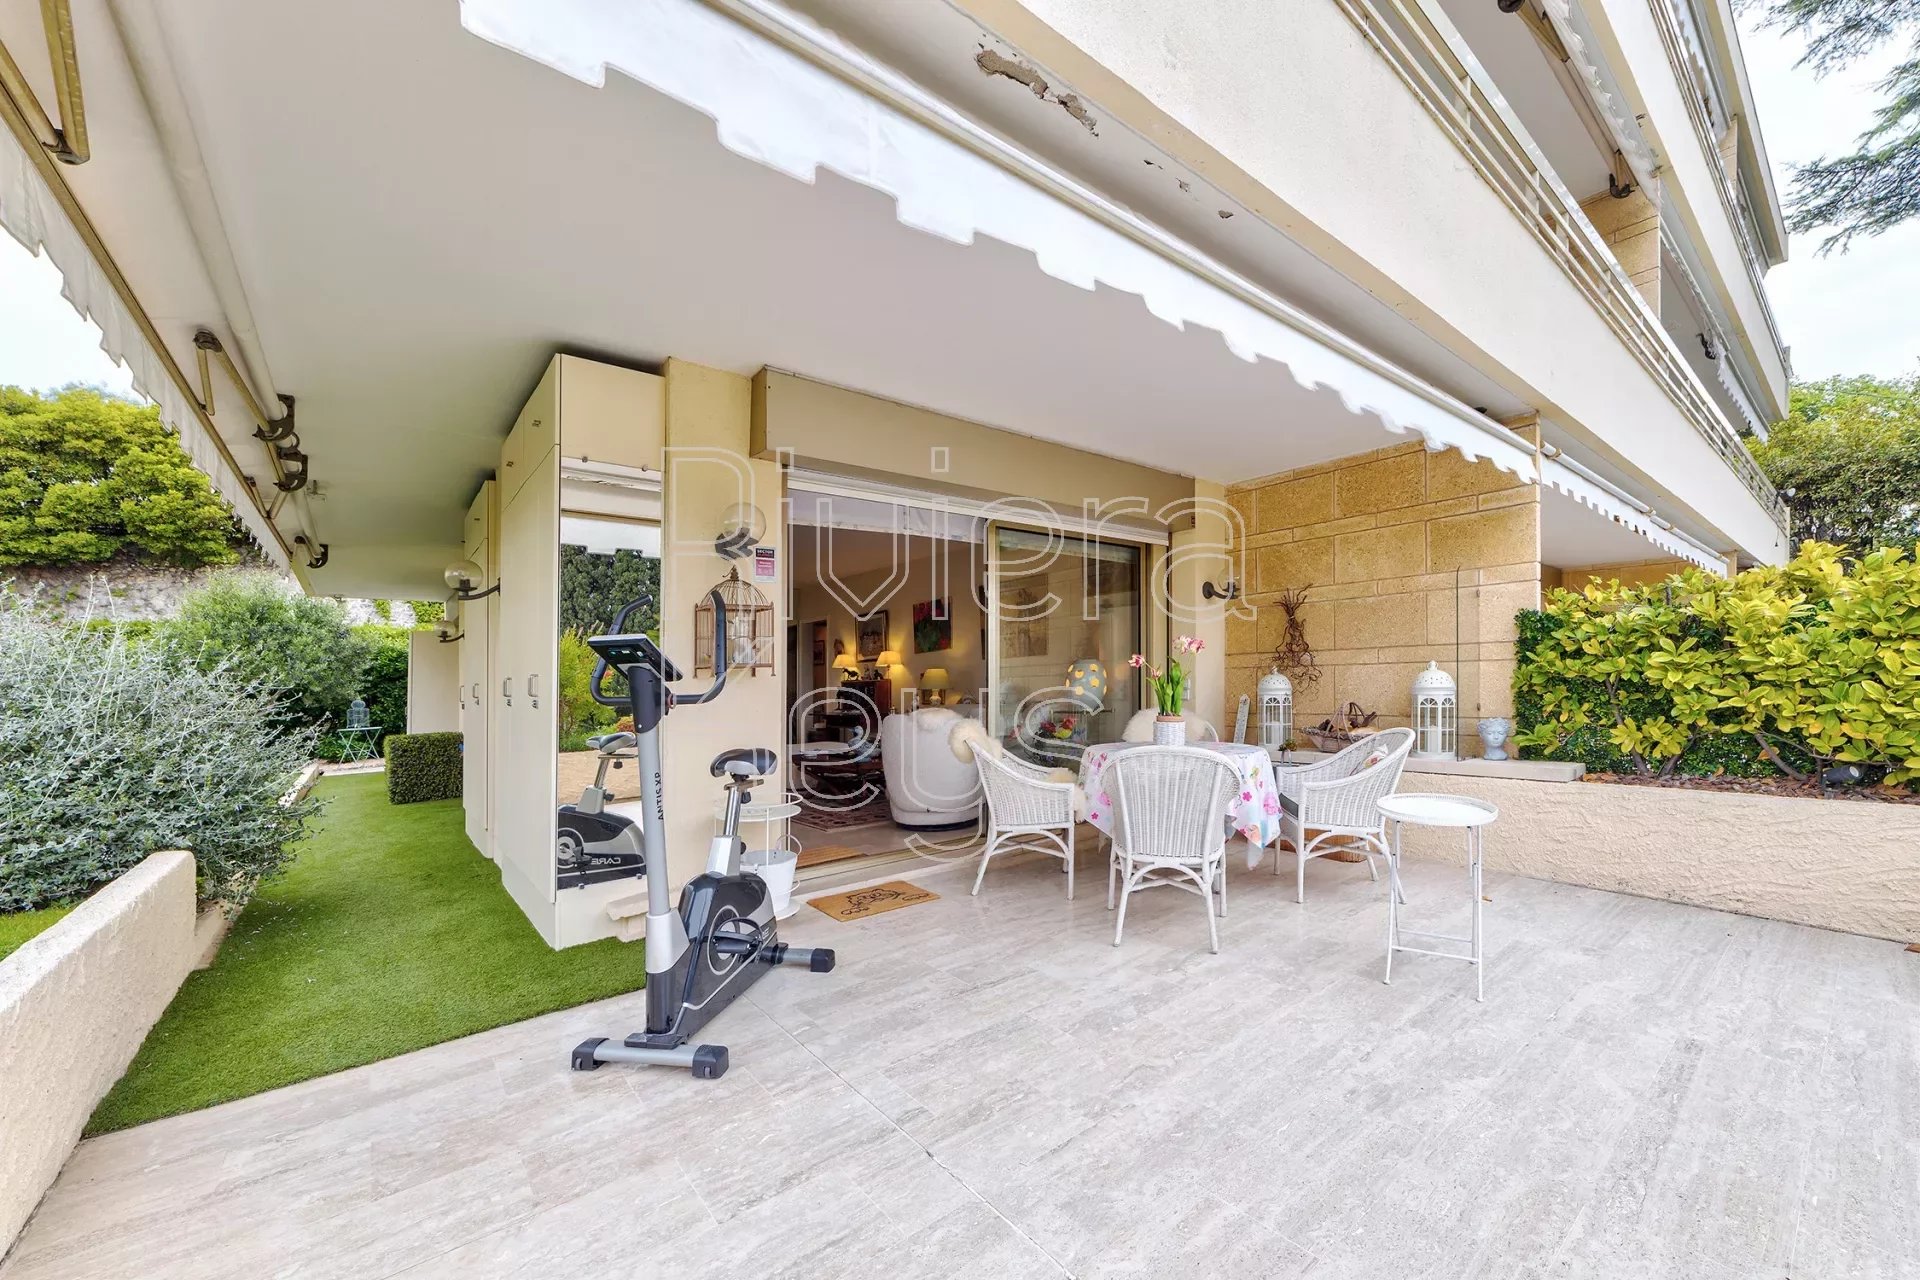 CANNES CALIFORNIE: Superb apartment on garden level, large terrace, swimming pool